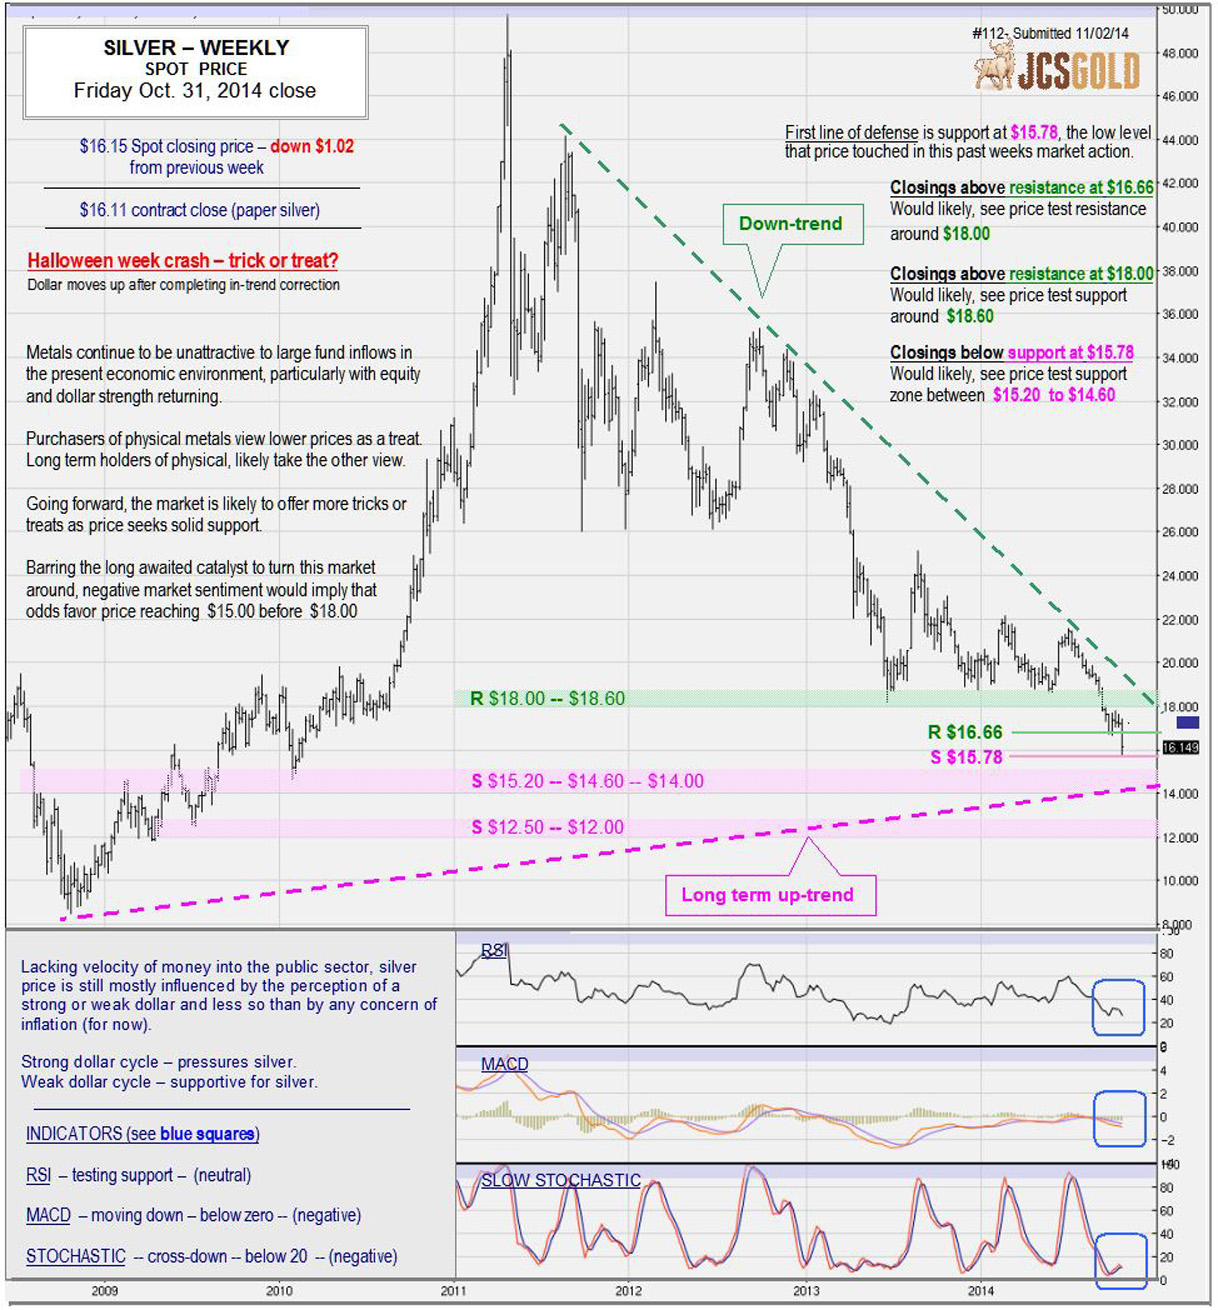 Oct. 31, 2014 chart & commentary